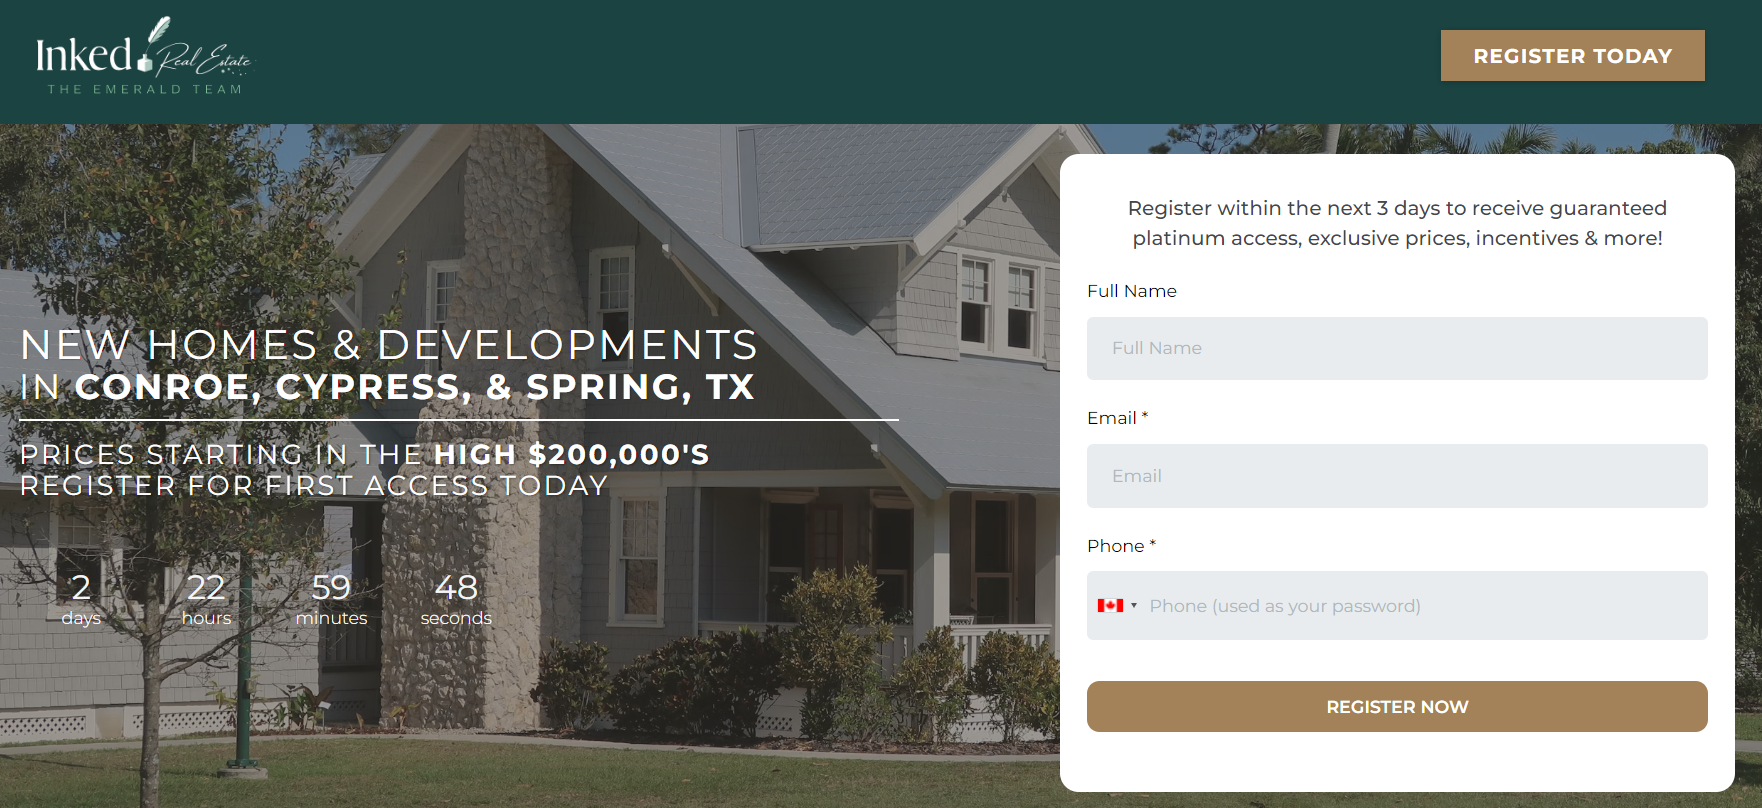 A landing page. A photo of a house and lawn and a form with fields for name, email and phone number and a "register now" button.